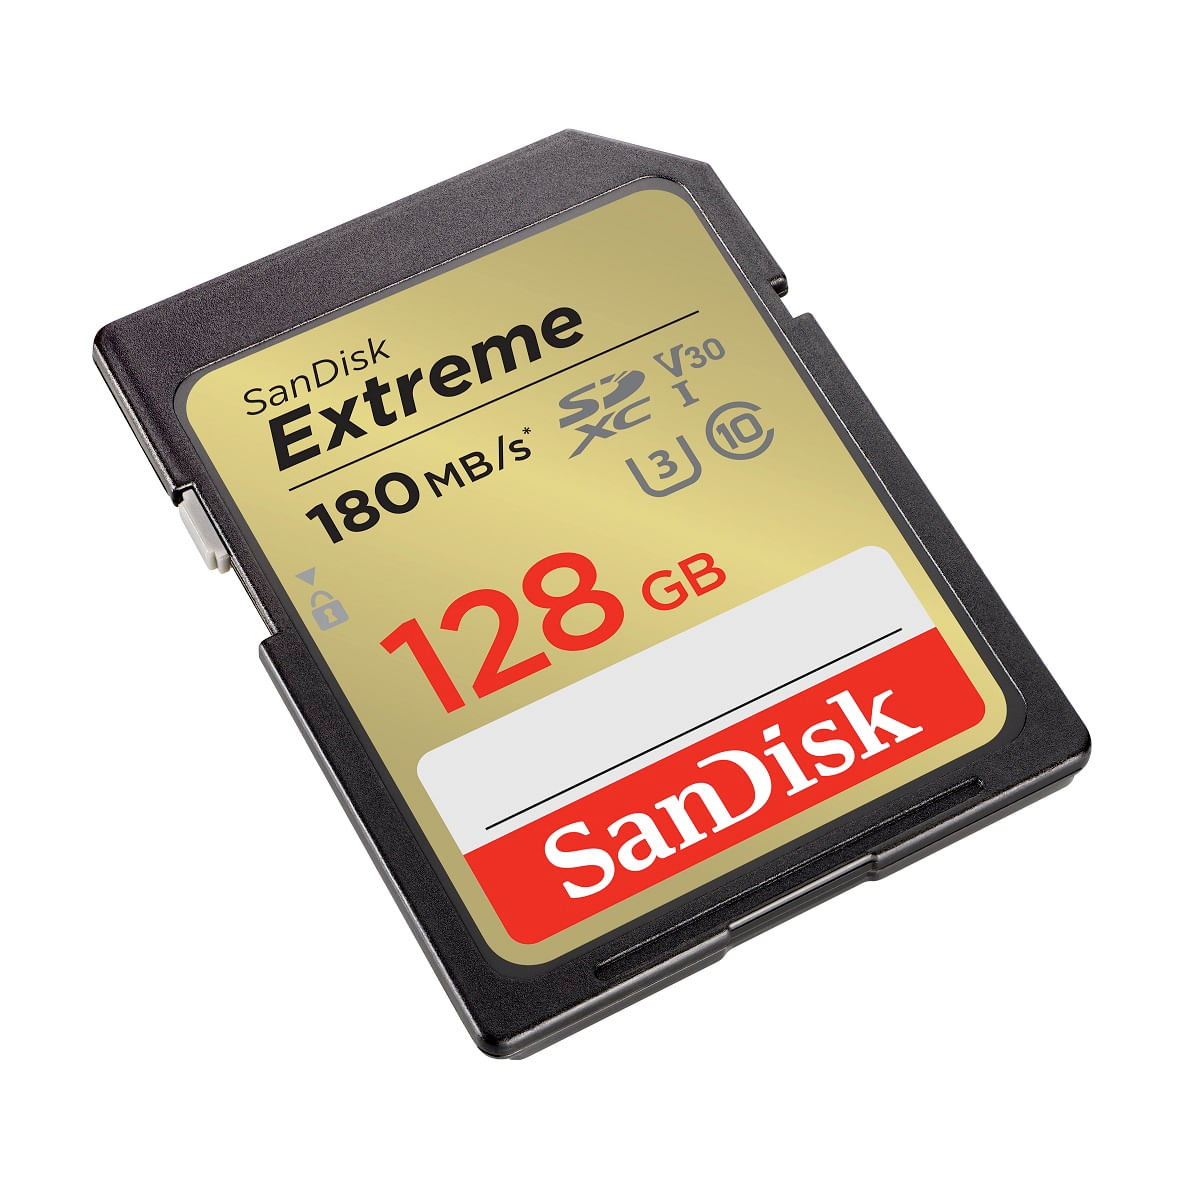 Persuasion fret write SanDisk Extreme Card de Memorie SDXC 128GB UHS-I Class 10 U3 V30 + 1 An  RescuePRO Deluxe- F64.ro - F64.ro